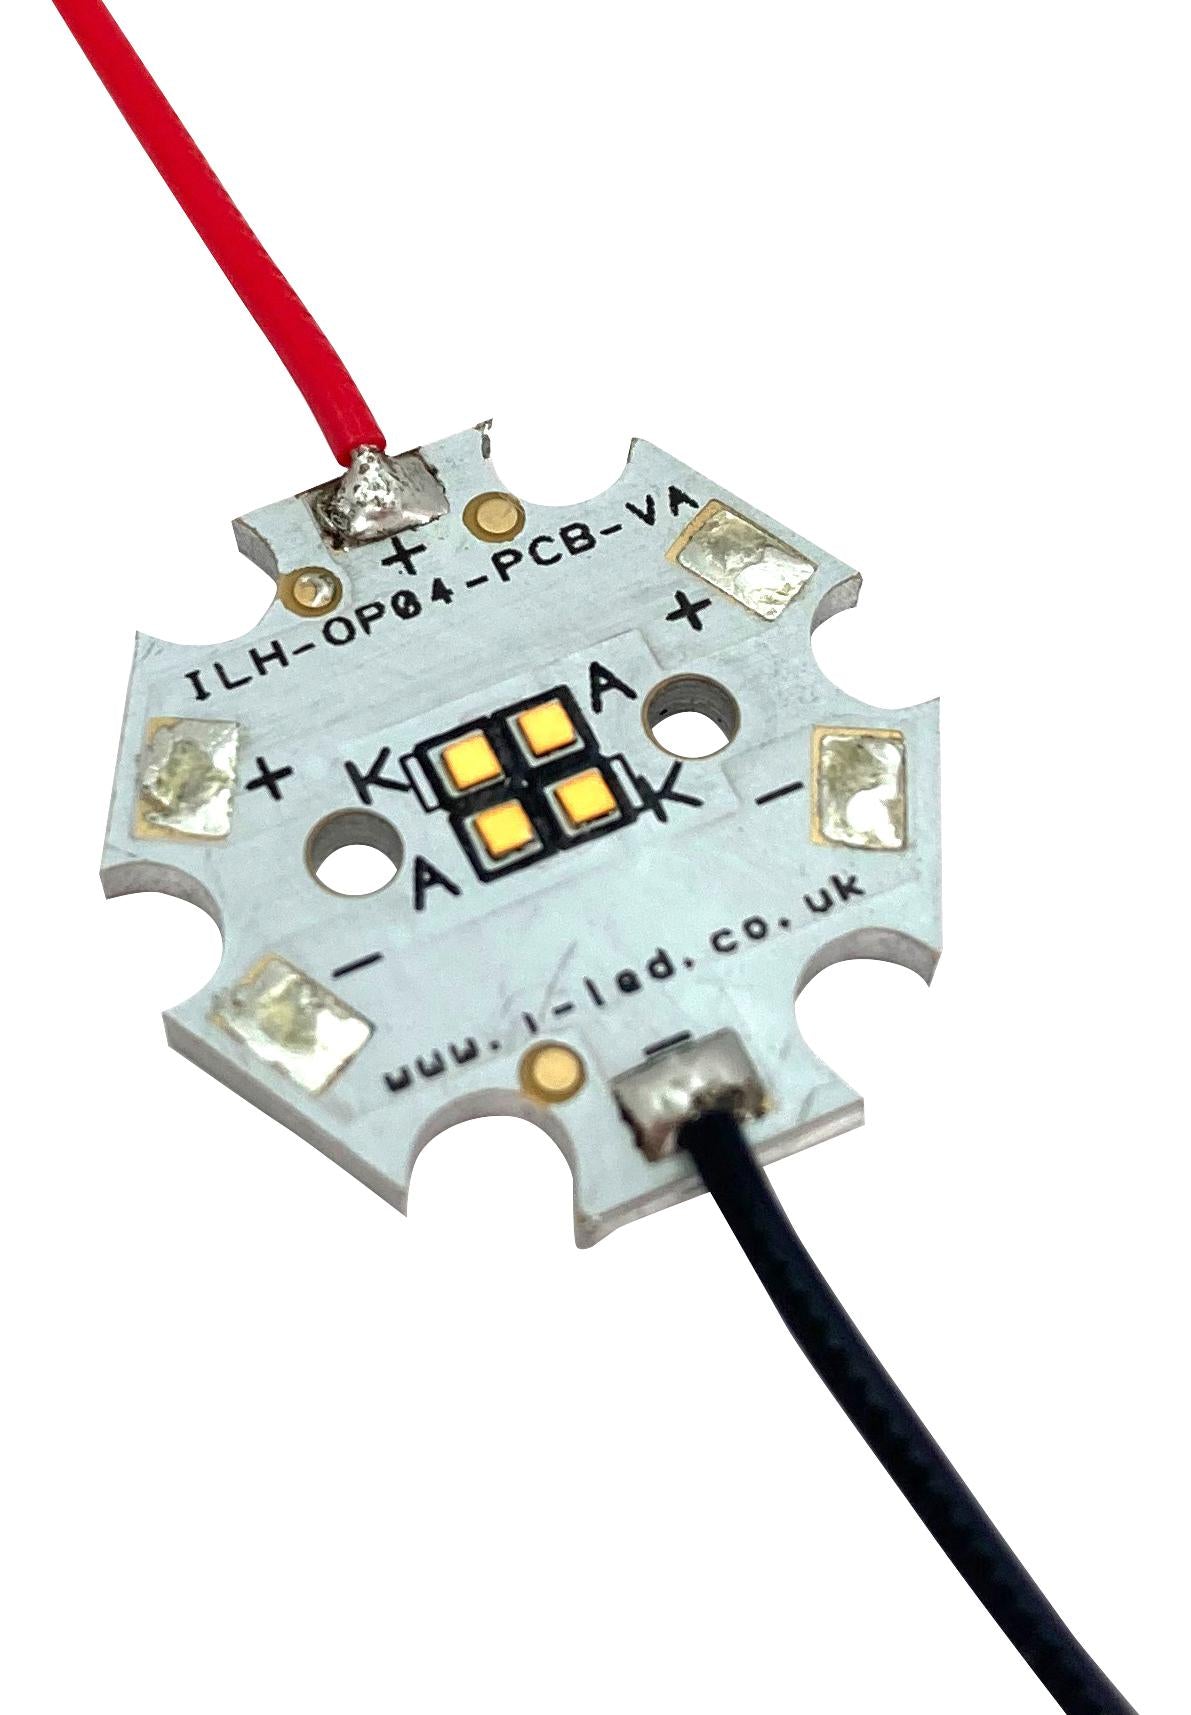 ILH-OP04-WH90-SC221-WIR200. LED MODULE, WHITE, 340LM, 5000K, STAR INTELLIGENT LED SOLUTIONS